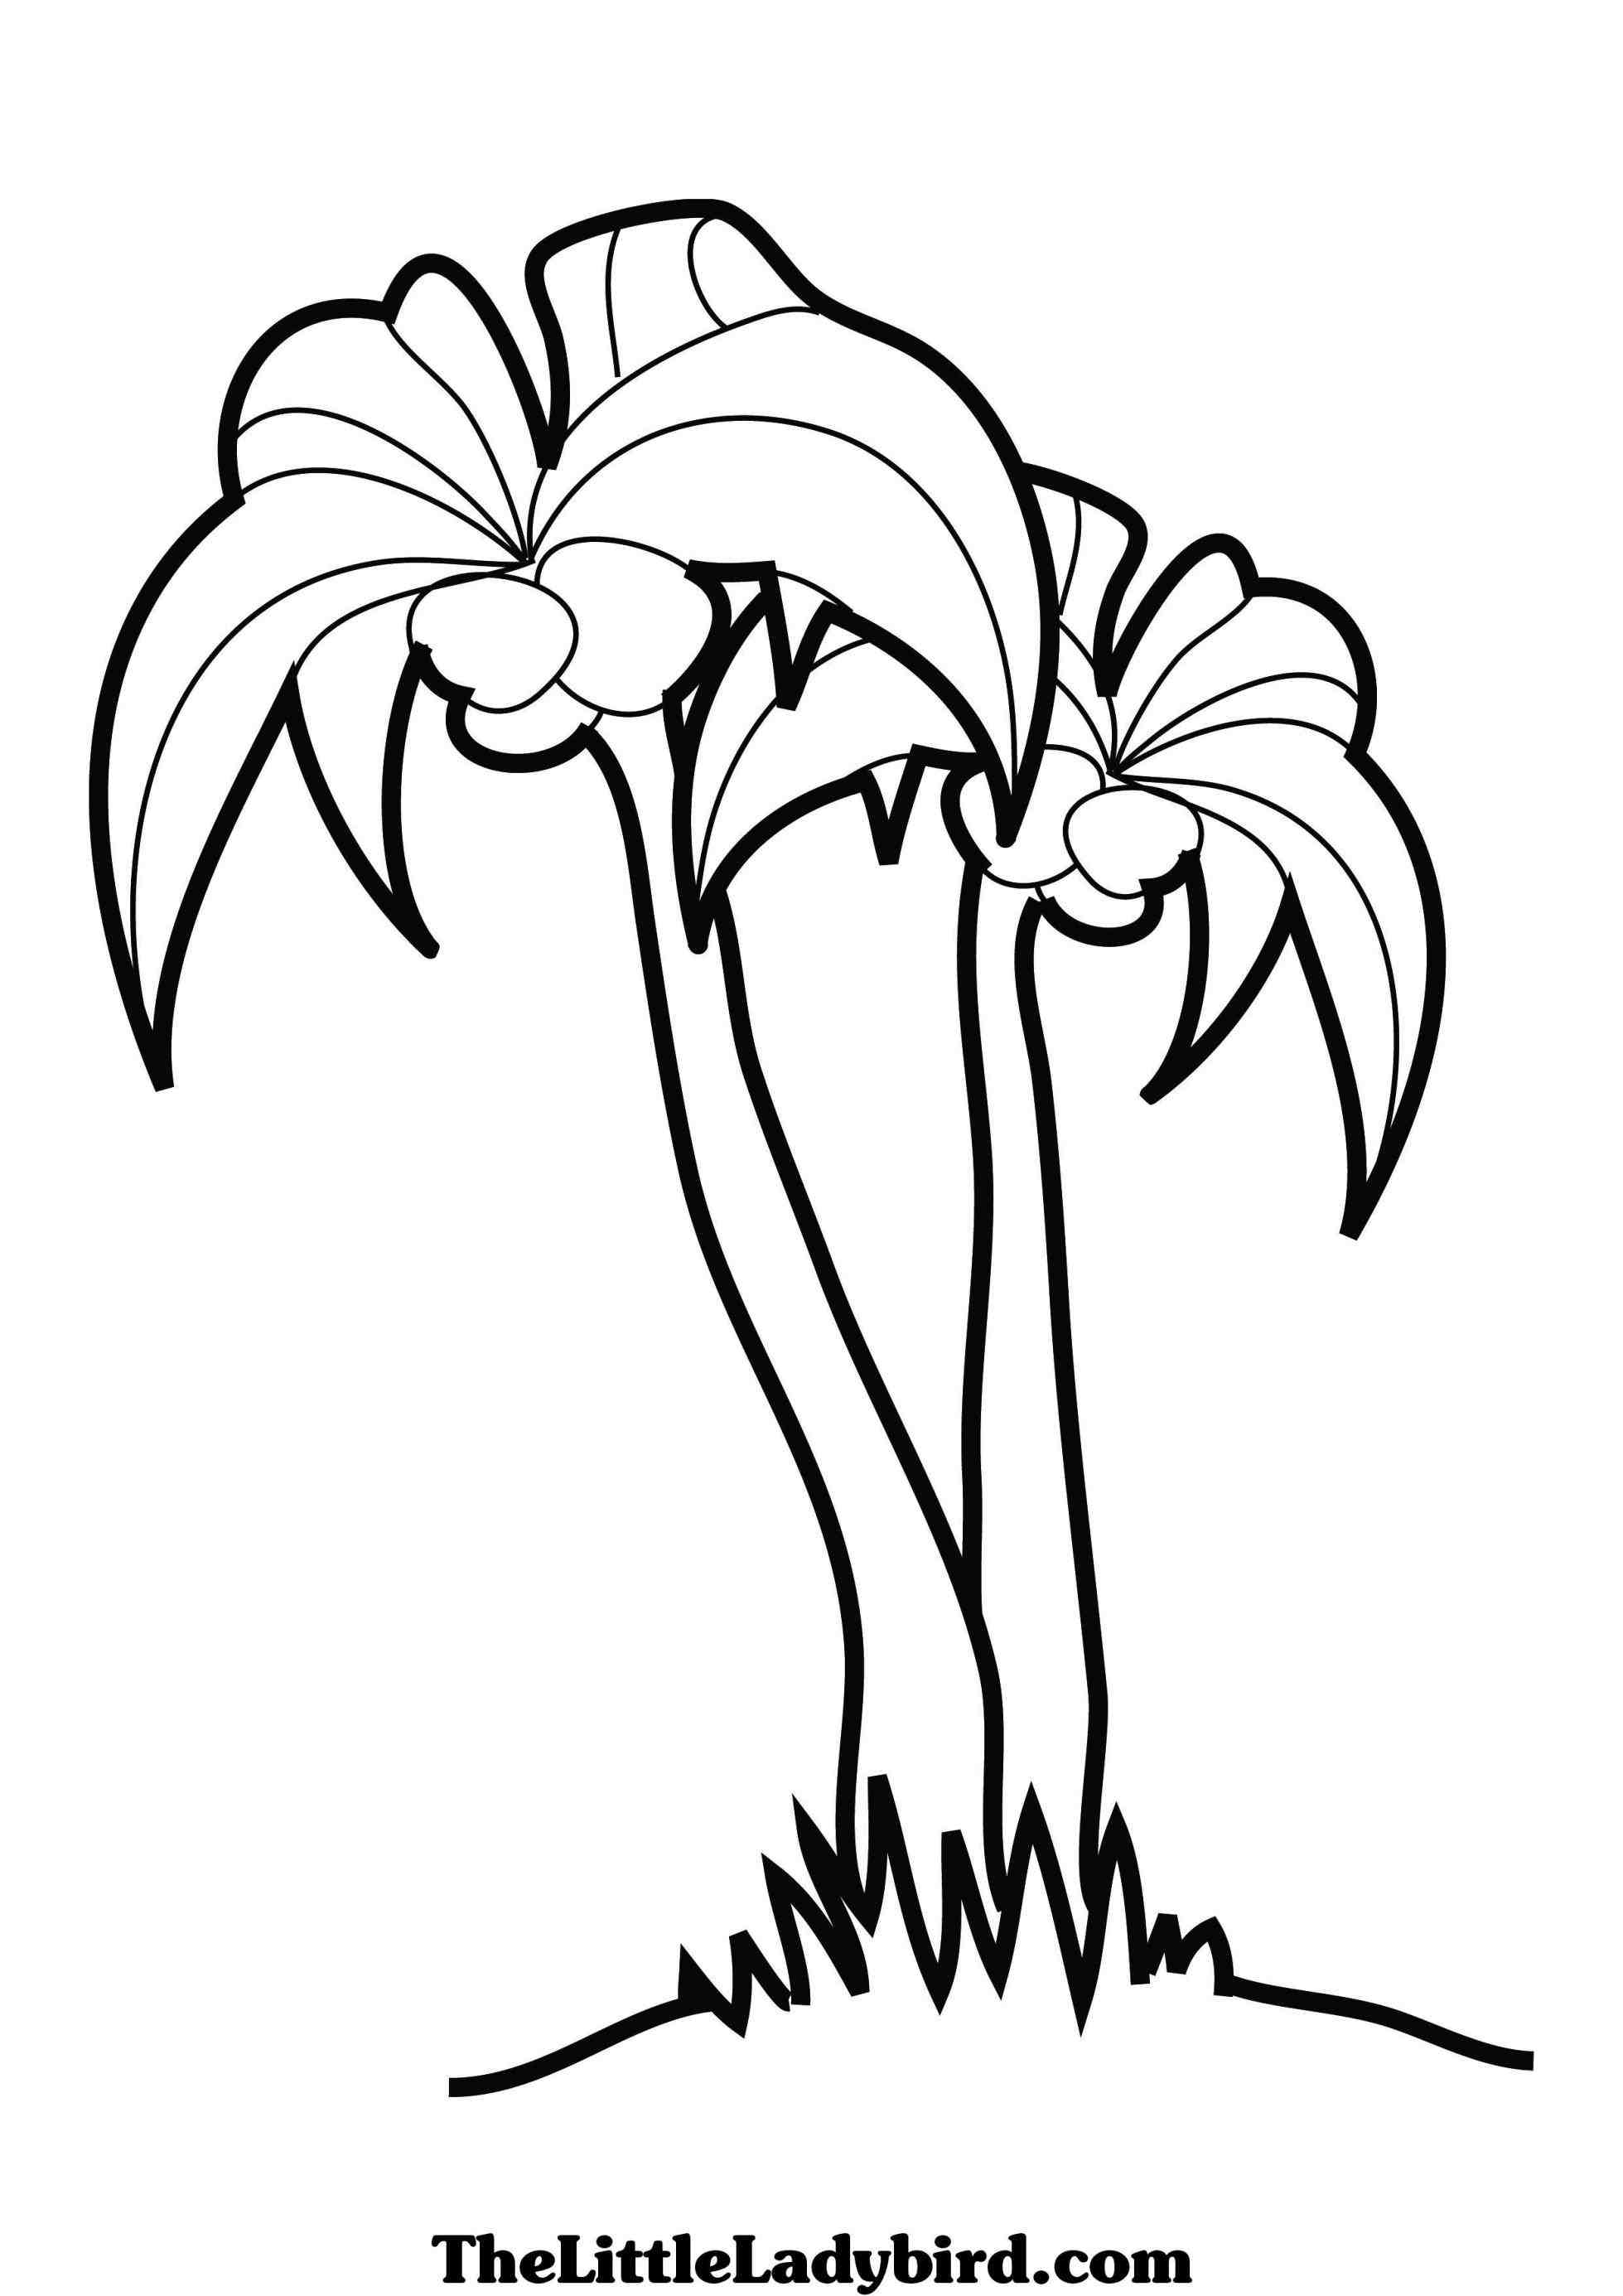 palm tree and beach coloring page › ngorong.club